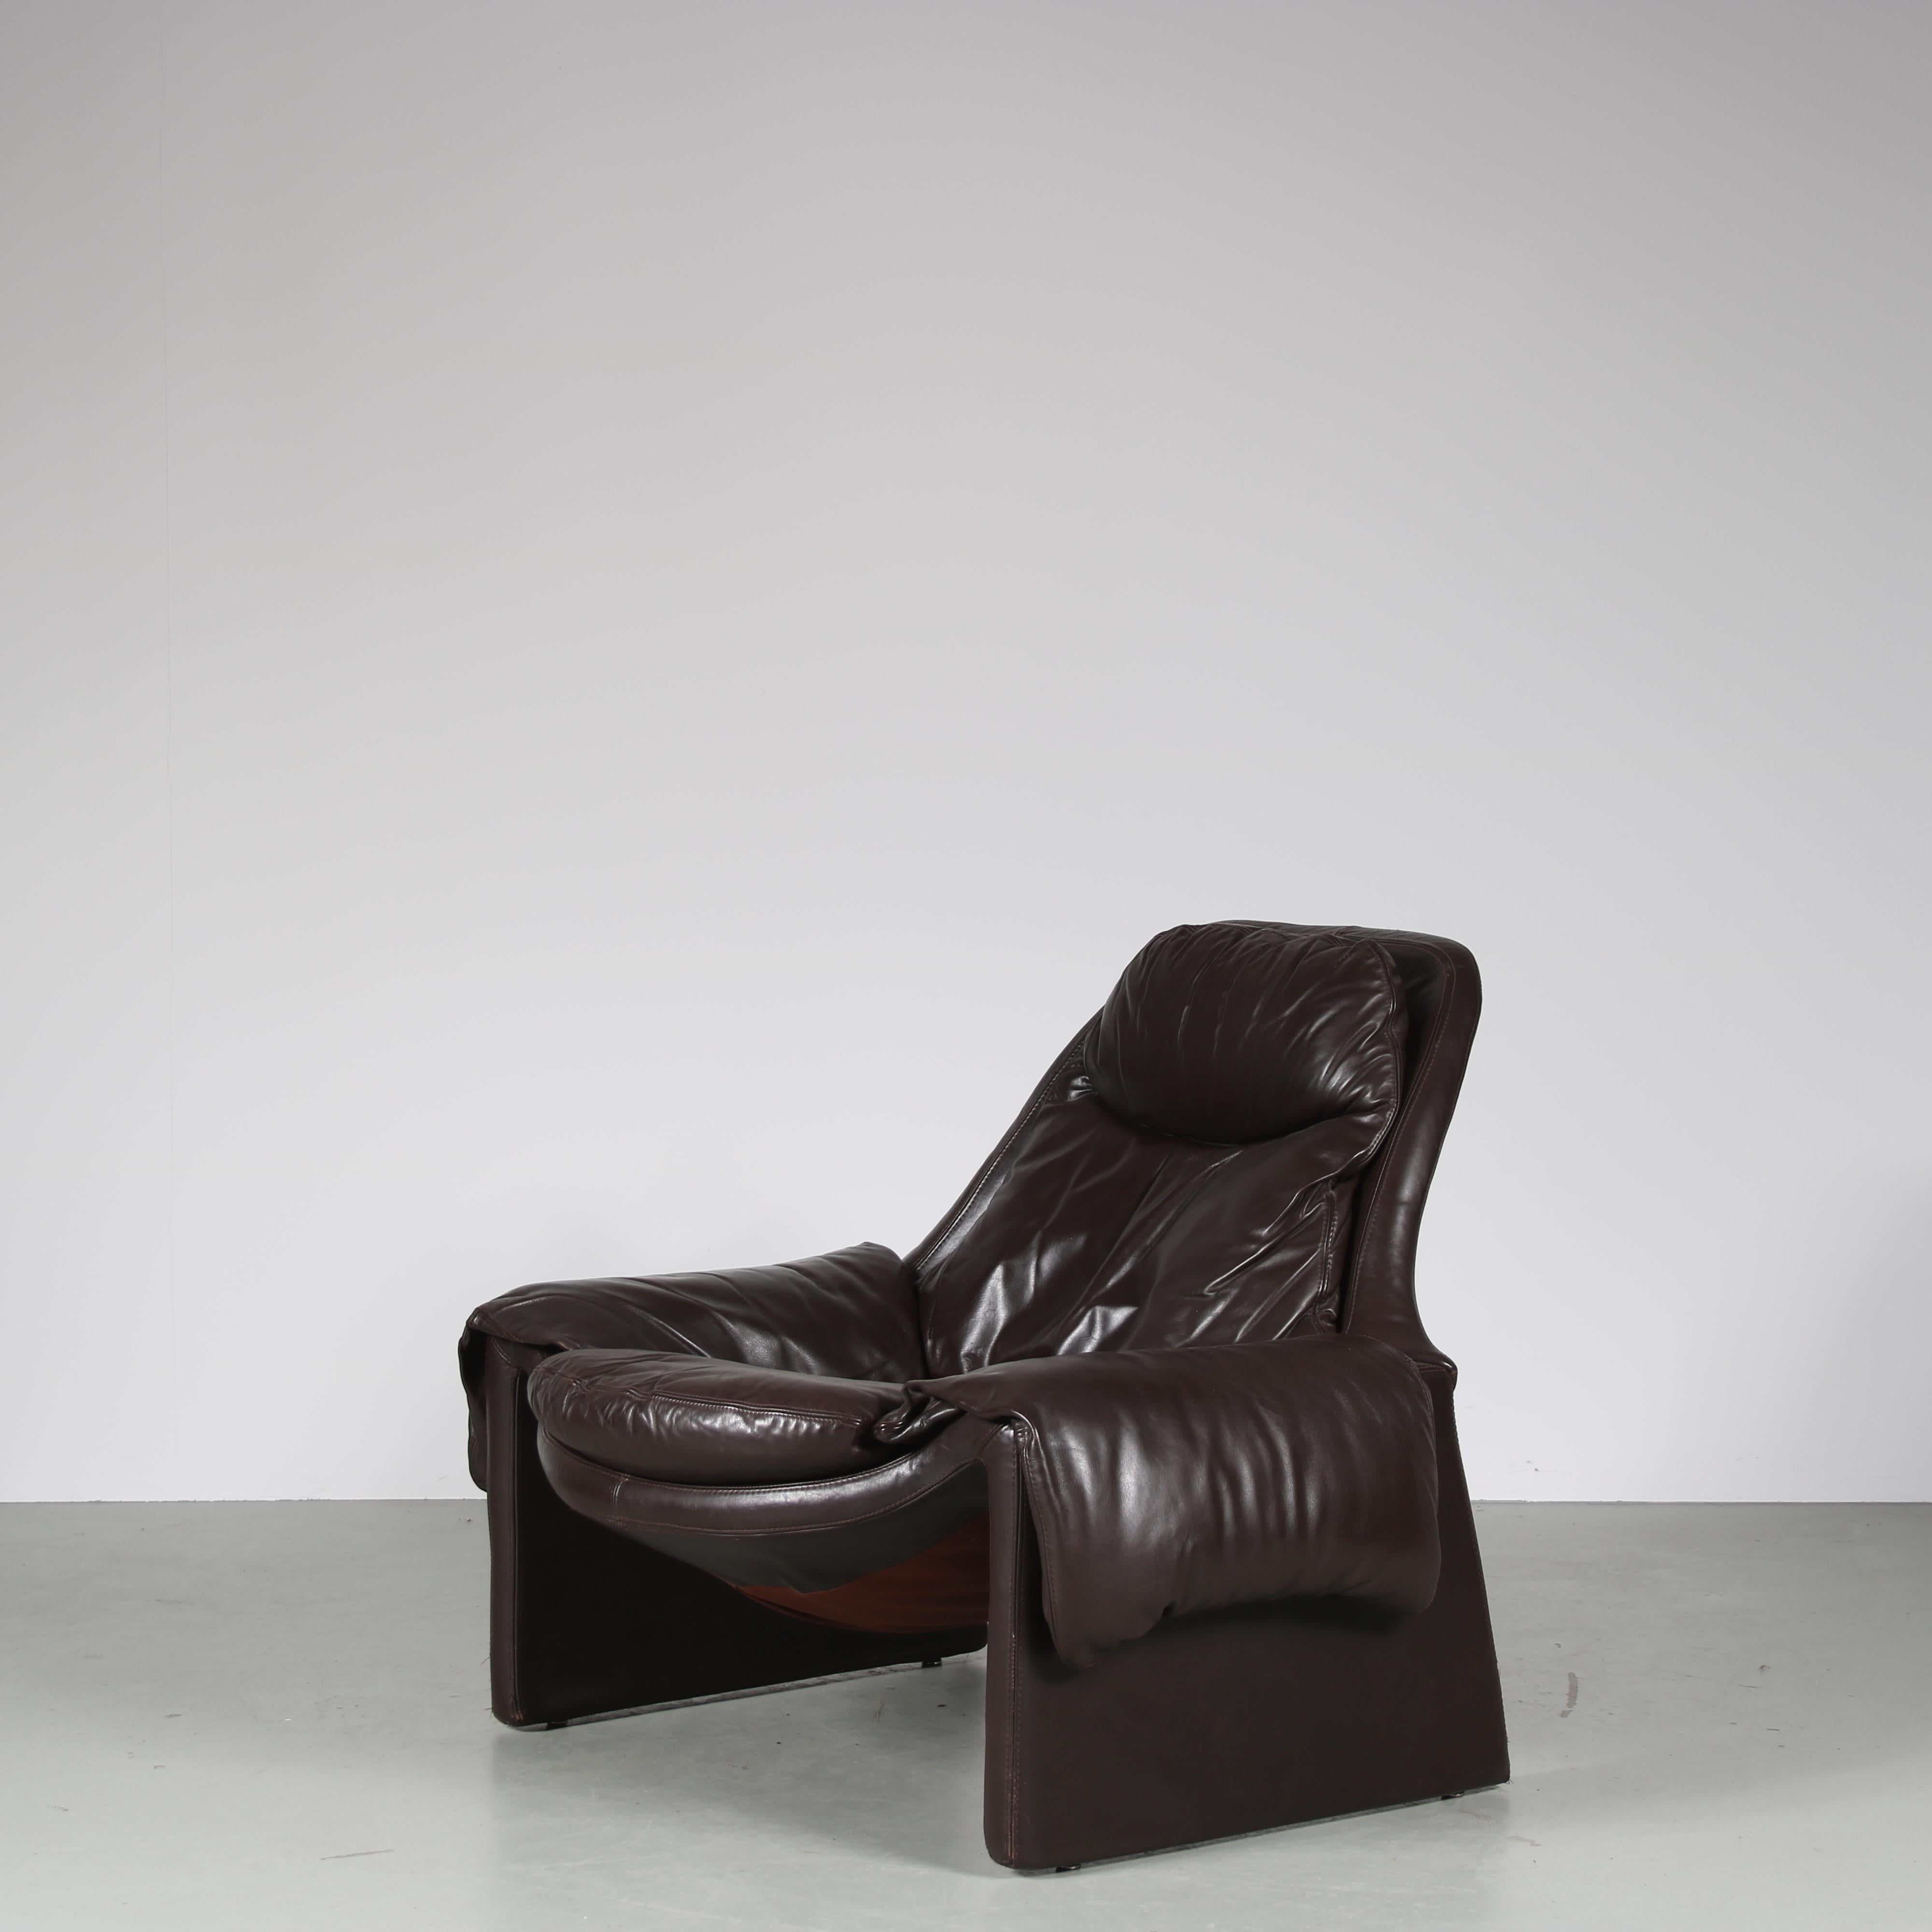 Late 20th Century “Proposals” Chair with Ottoman by Vittorio Introini for Saporiti, Italy, 1970 For Sale